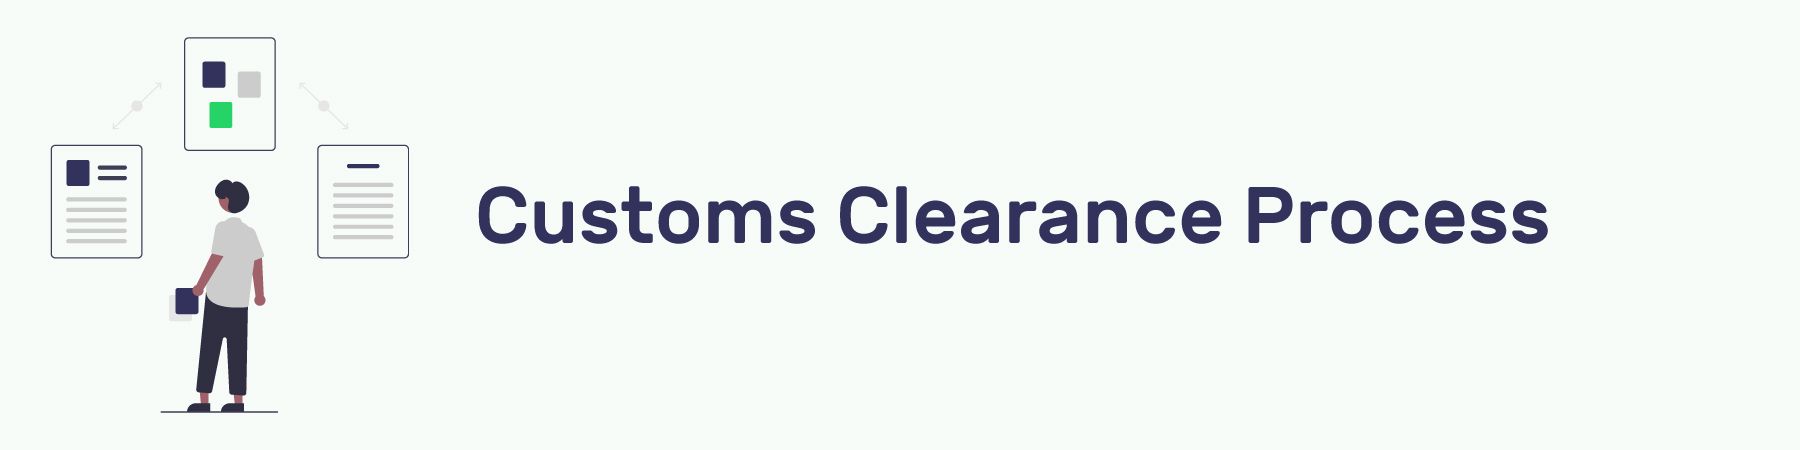 Customs Clearance Process Section Header